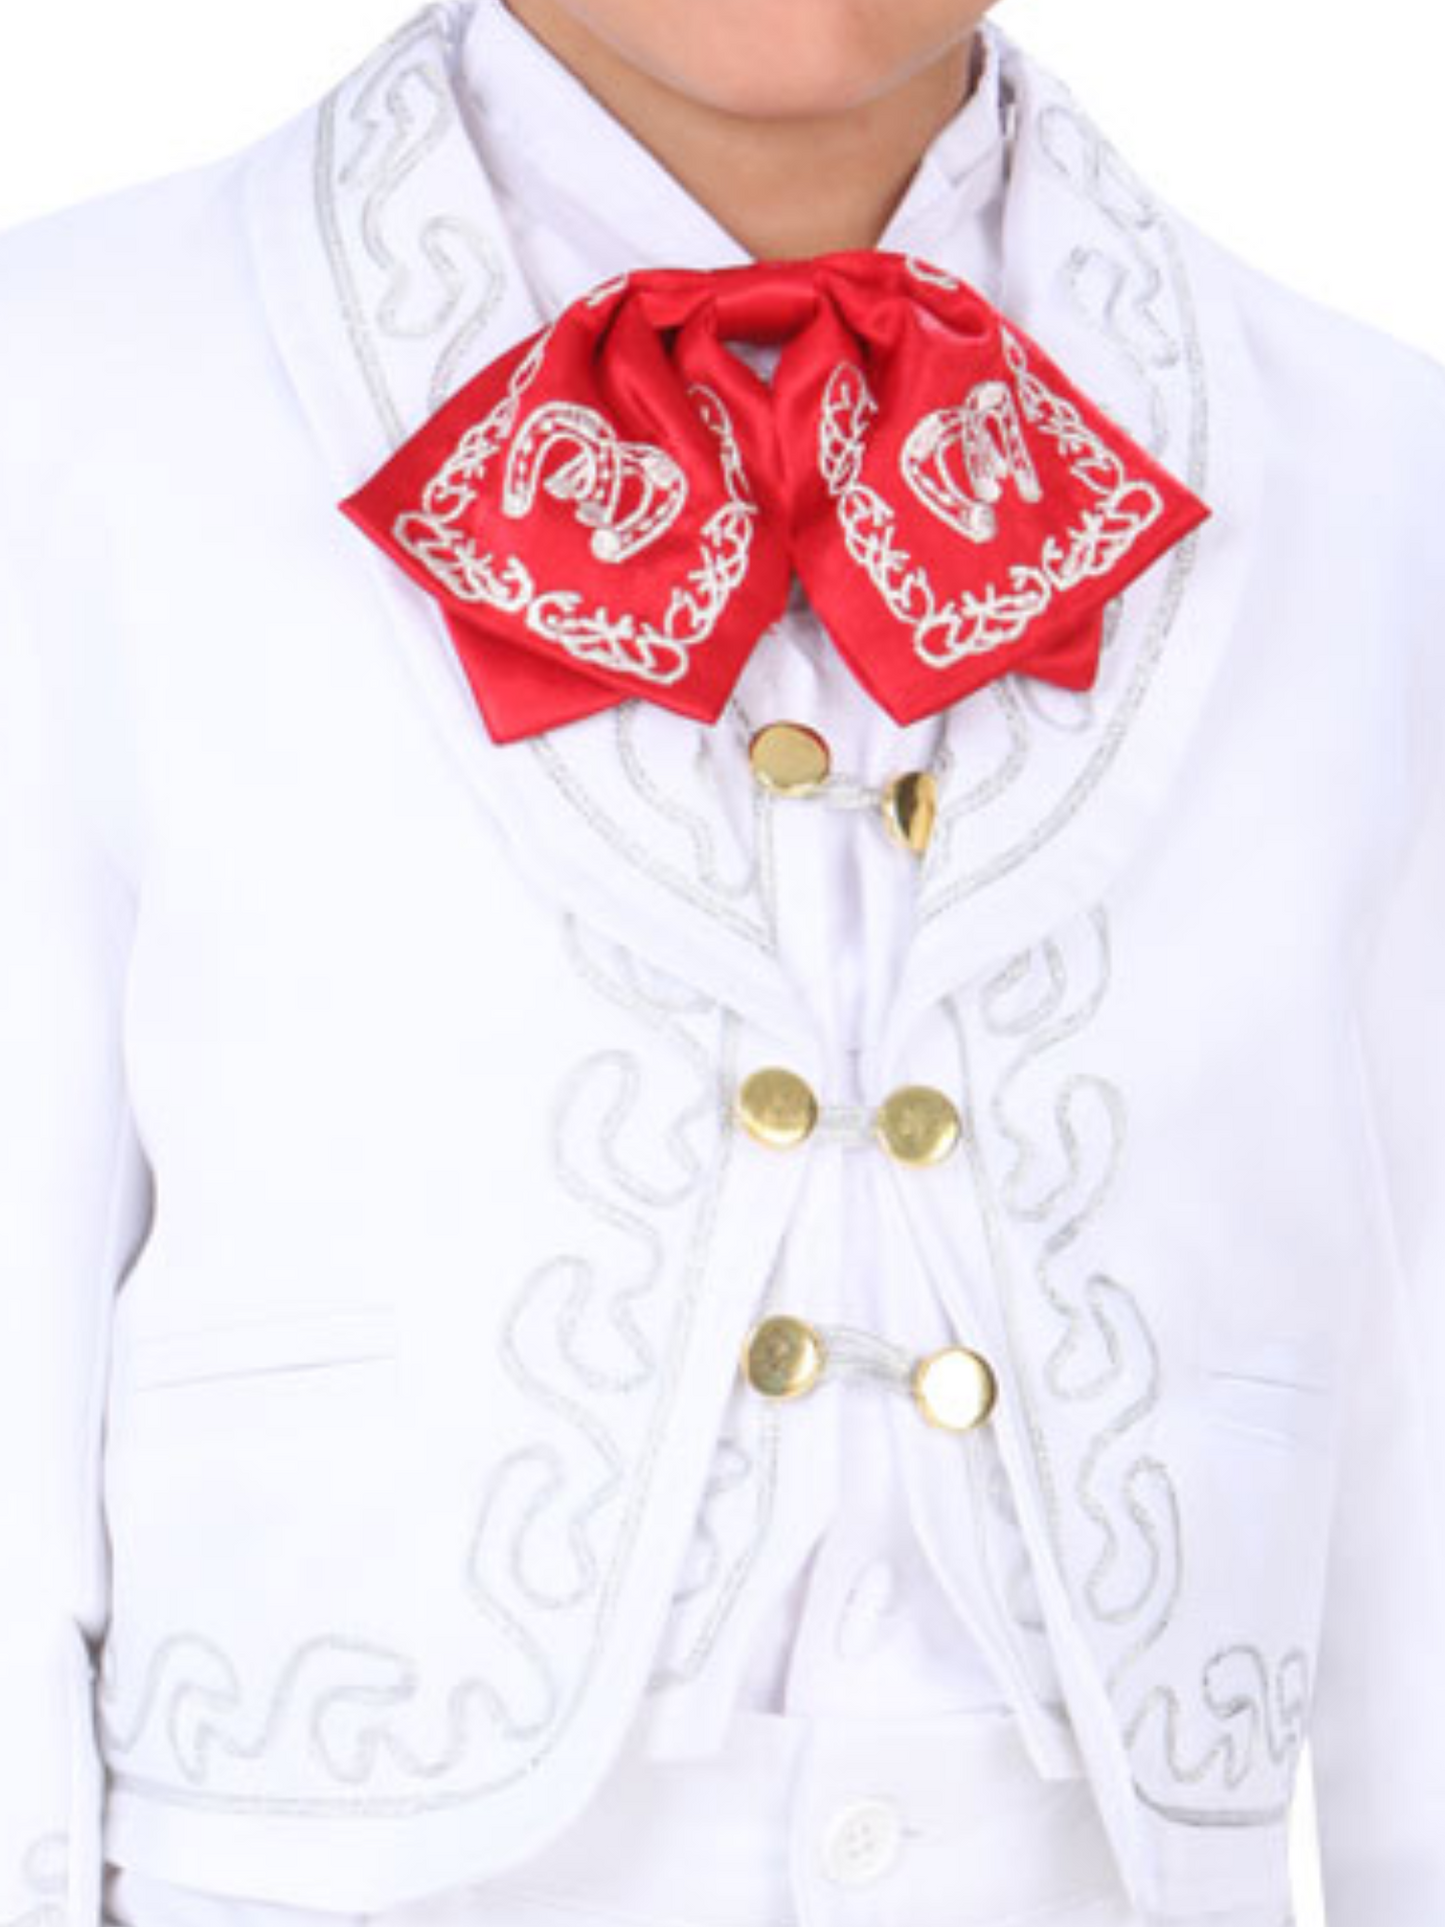 White/White/Red Embroidered Charro Suit for Children 'El General' - ID: 34263 Charro Suit El General